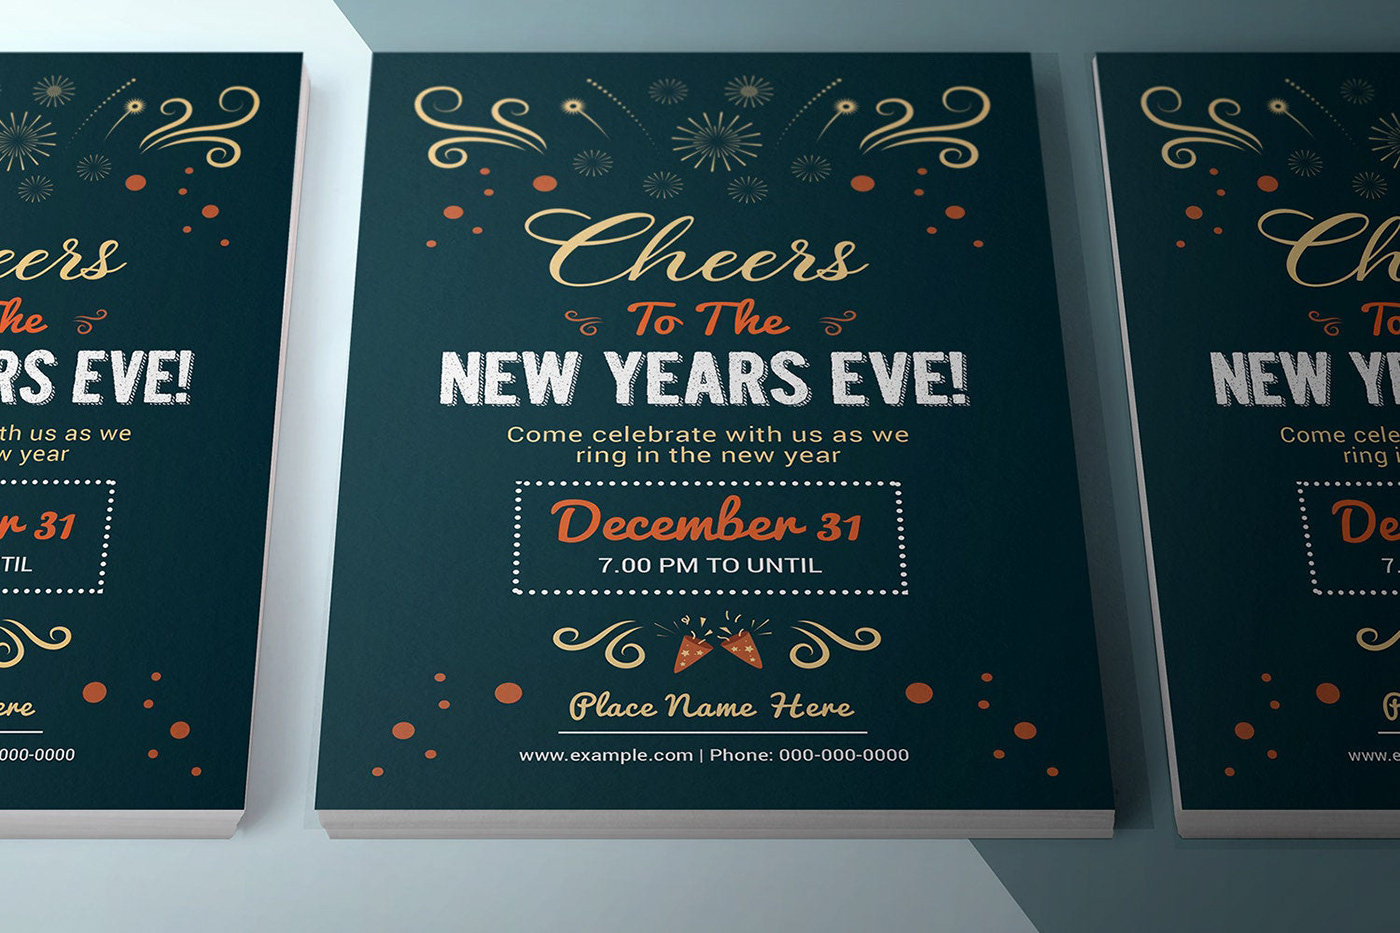 New Year Party new year party flyer new year invitaiton holiday party Invitation Card invitaton template photoshop template ms word New Year poster